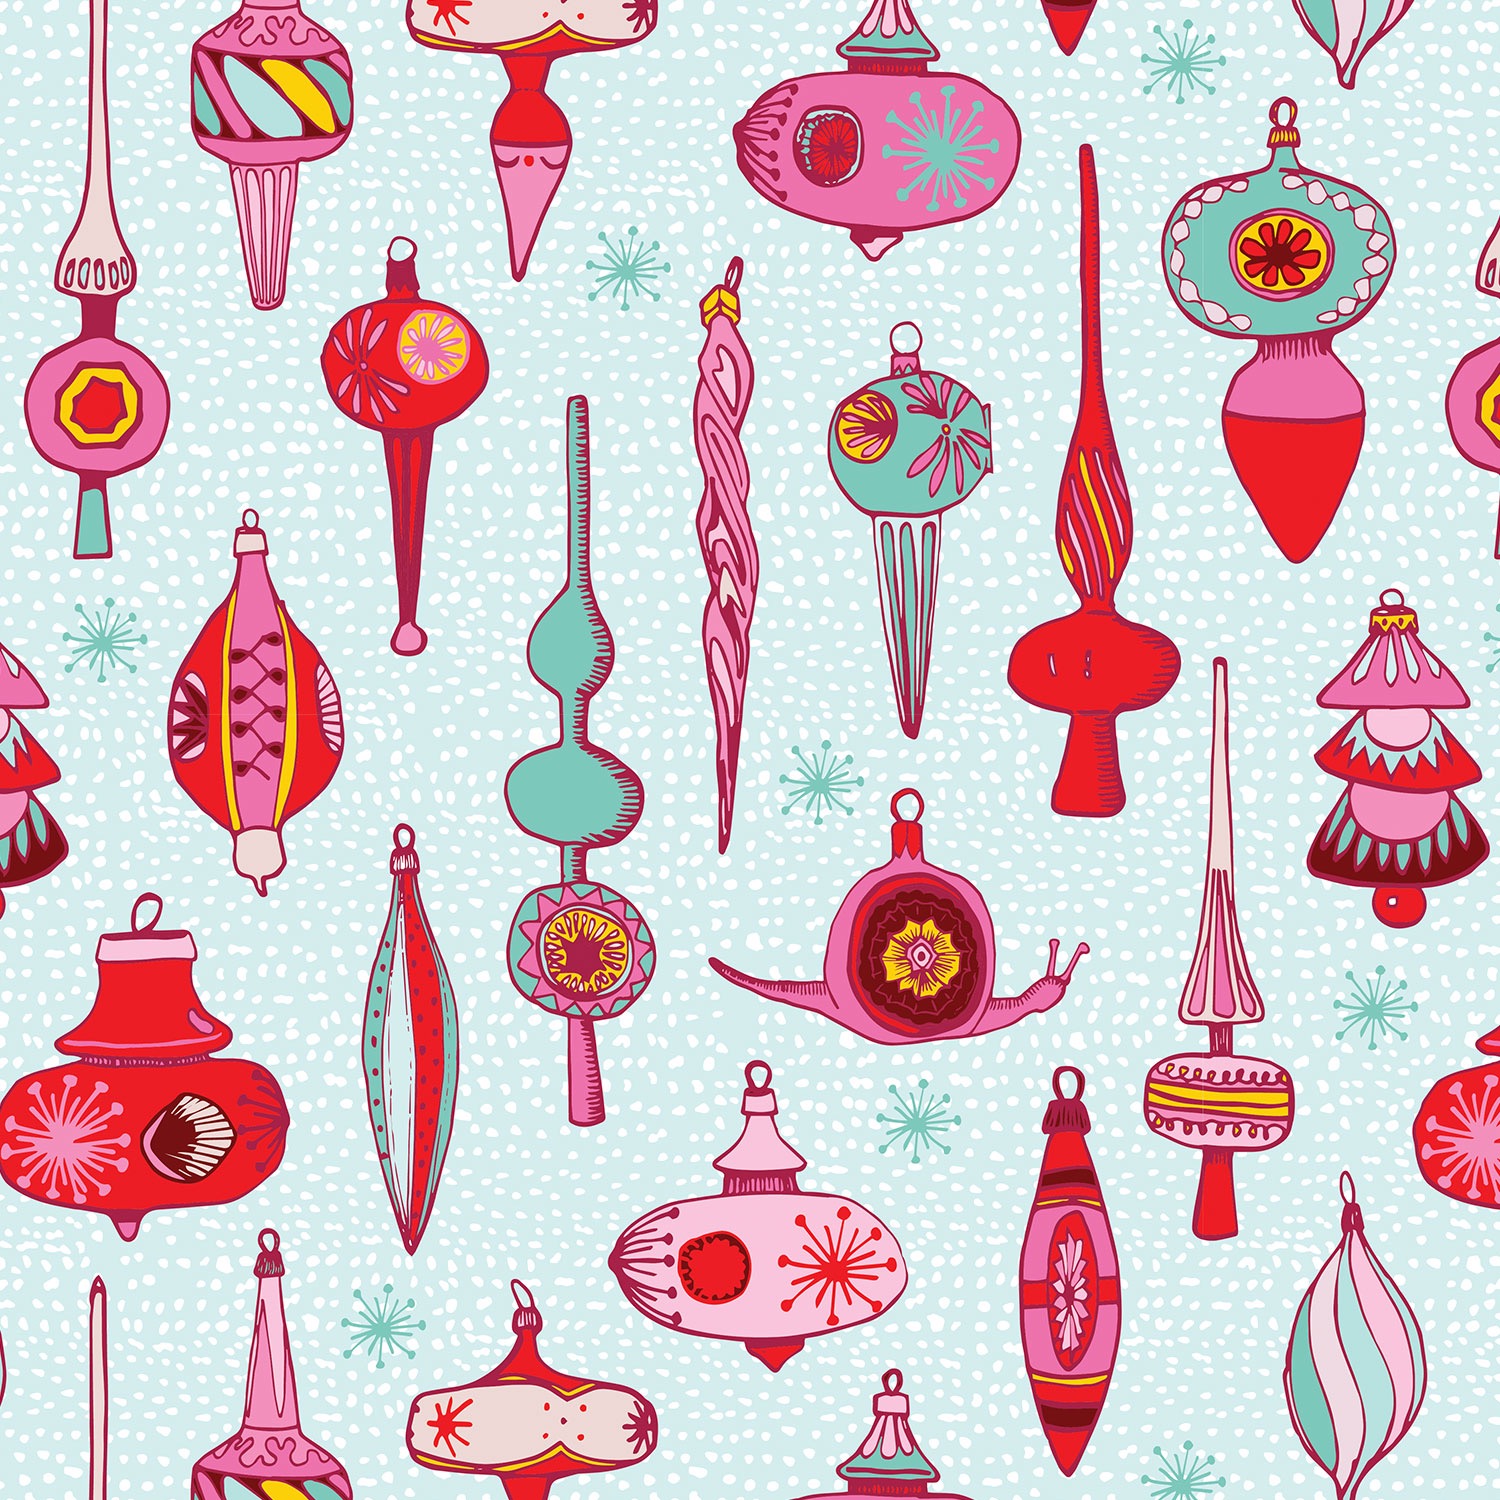 Australian designer Clare Martin Design’s portfolio of whimsical, colourful patterns and illustrations at Booth 618. 596